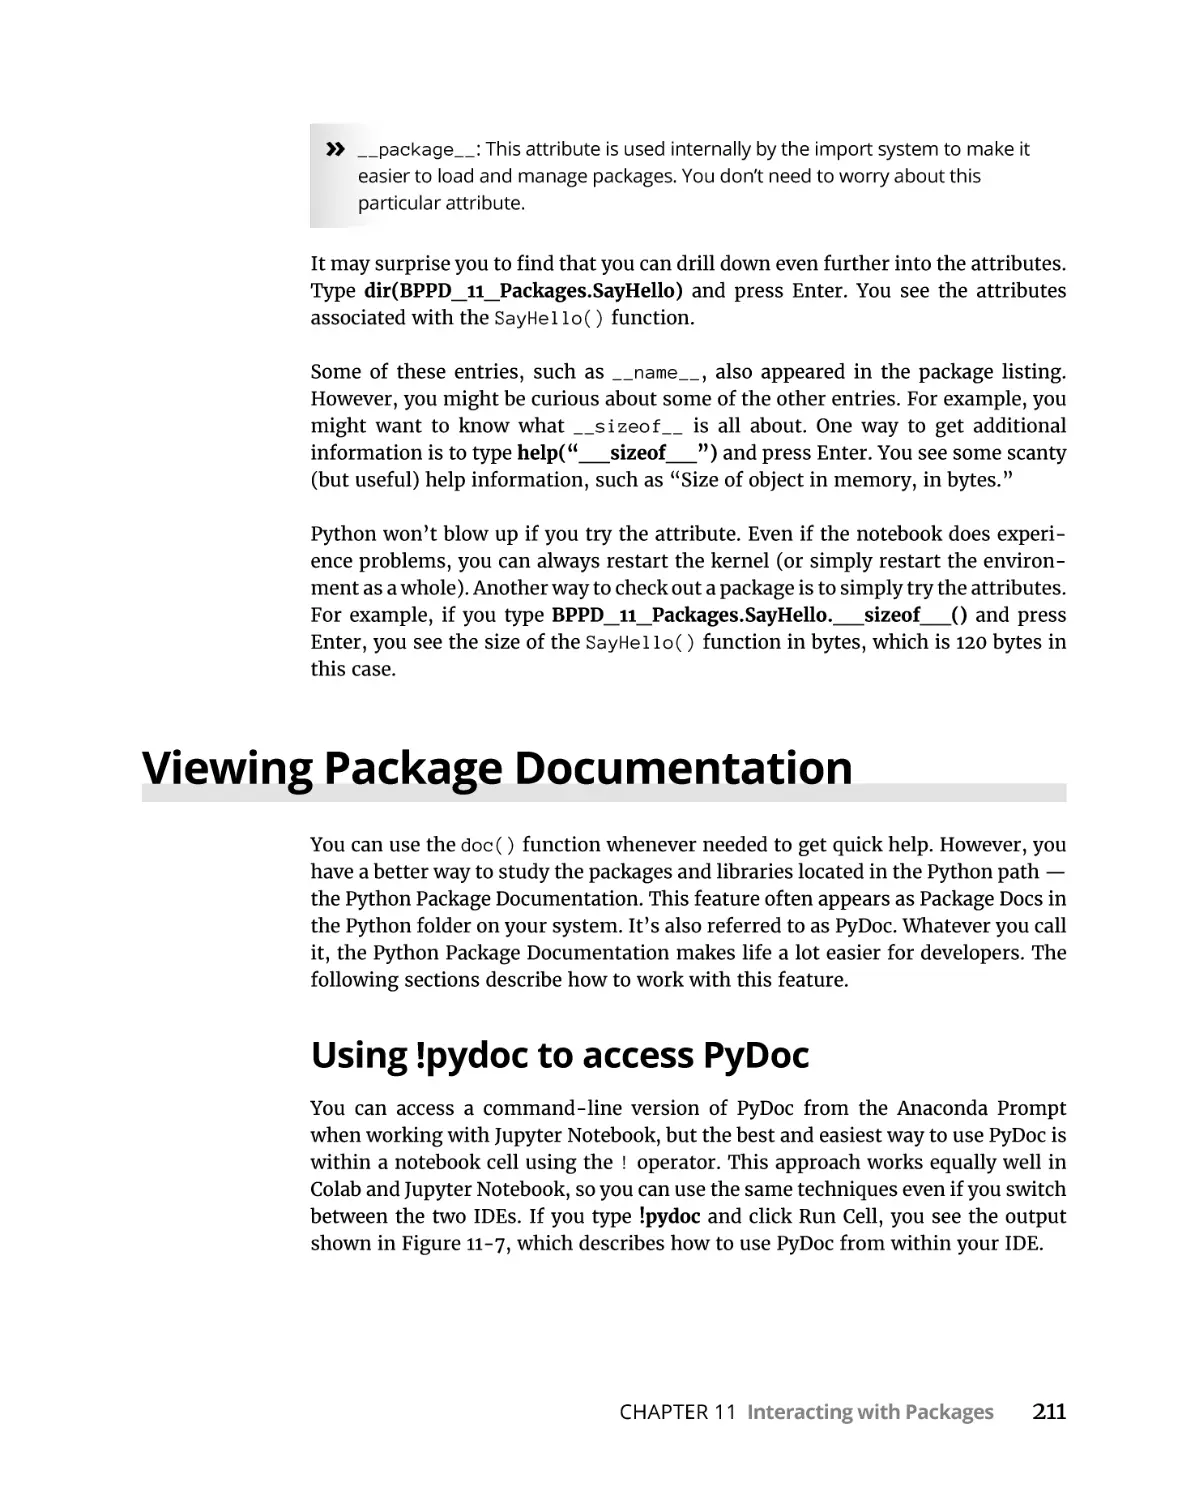 Viewing Package Documentation
Using !pydoc to access PyDoc